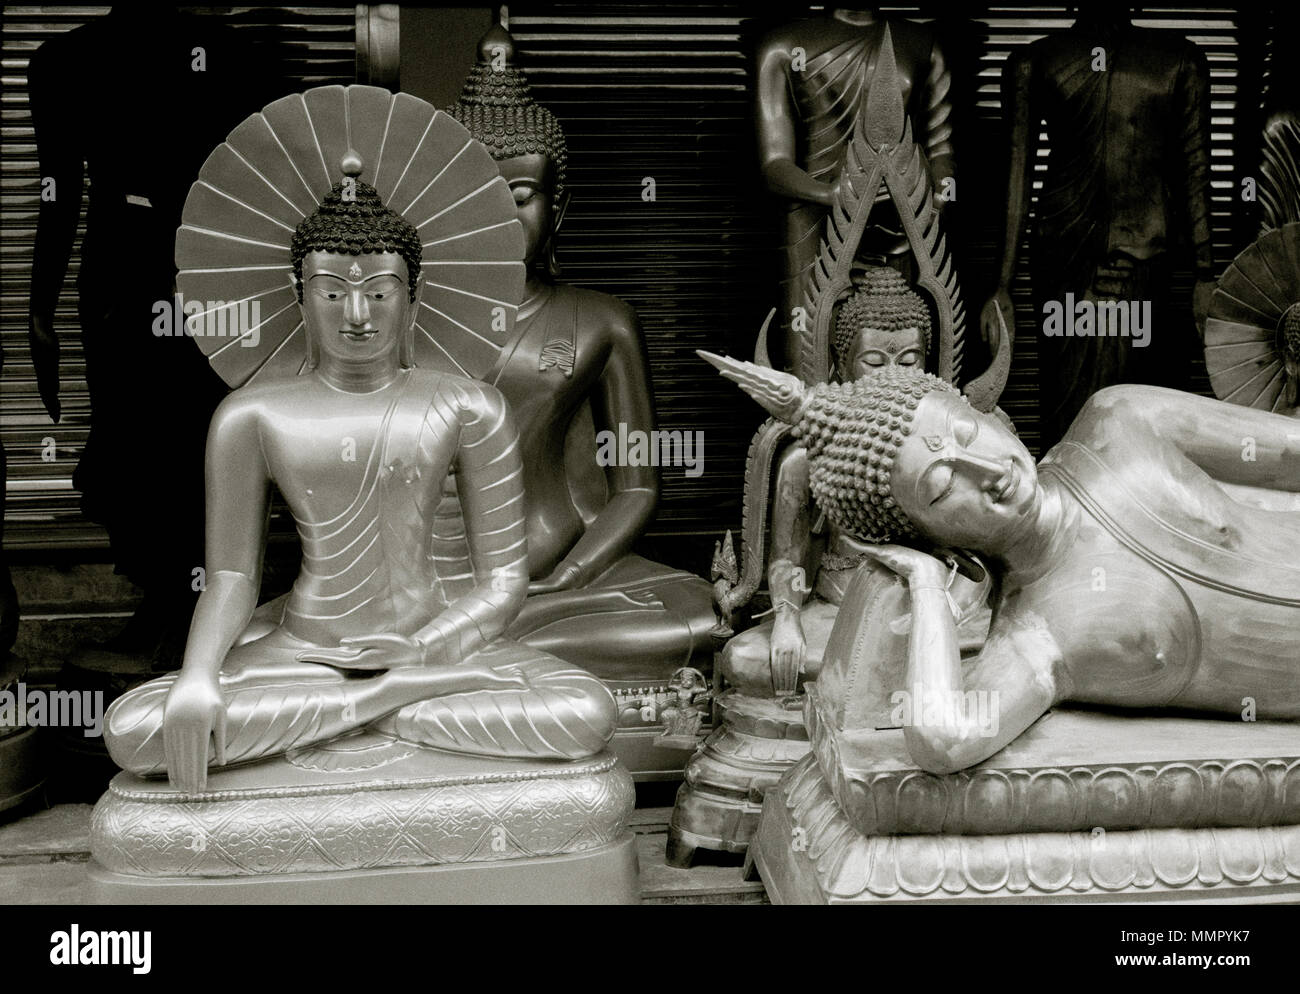 Reclining Buddha carving statue art for sale in Bamrung Muang Road in Bangkok in Thailand Southeast Asia Far East. Buddhism Buddhist Religion B&W Stock Photo